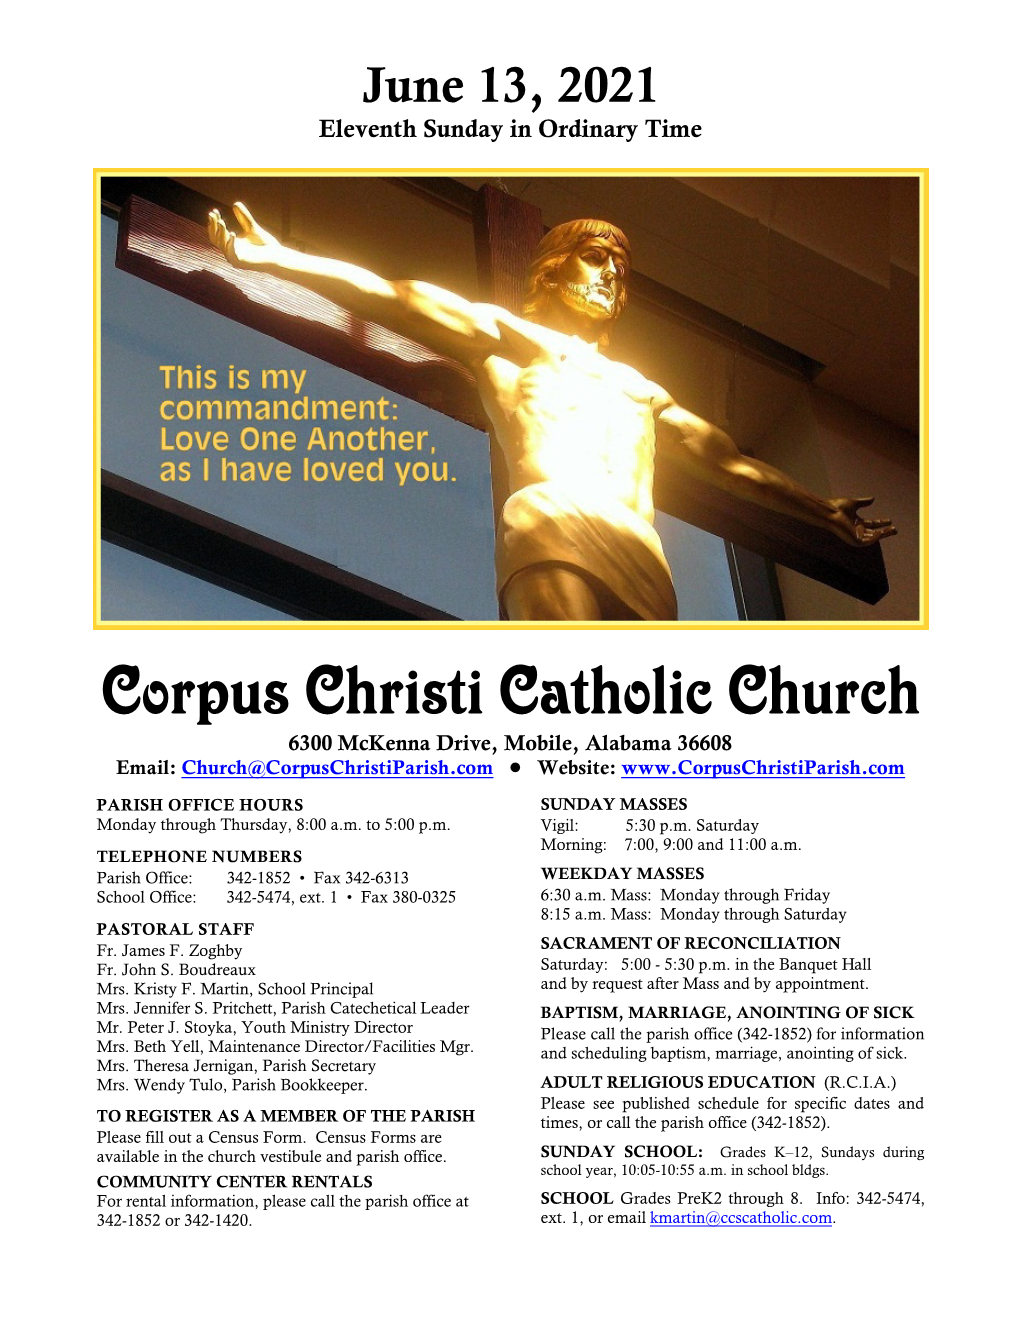 Corpus Christi Catholic Church Community As We REST in PEACE Encourage and Support Men to Follow the Example of St